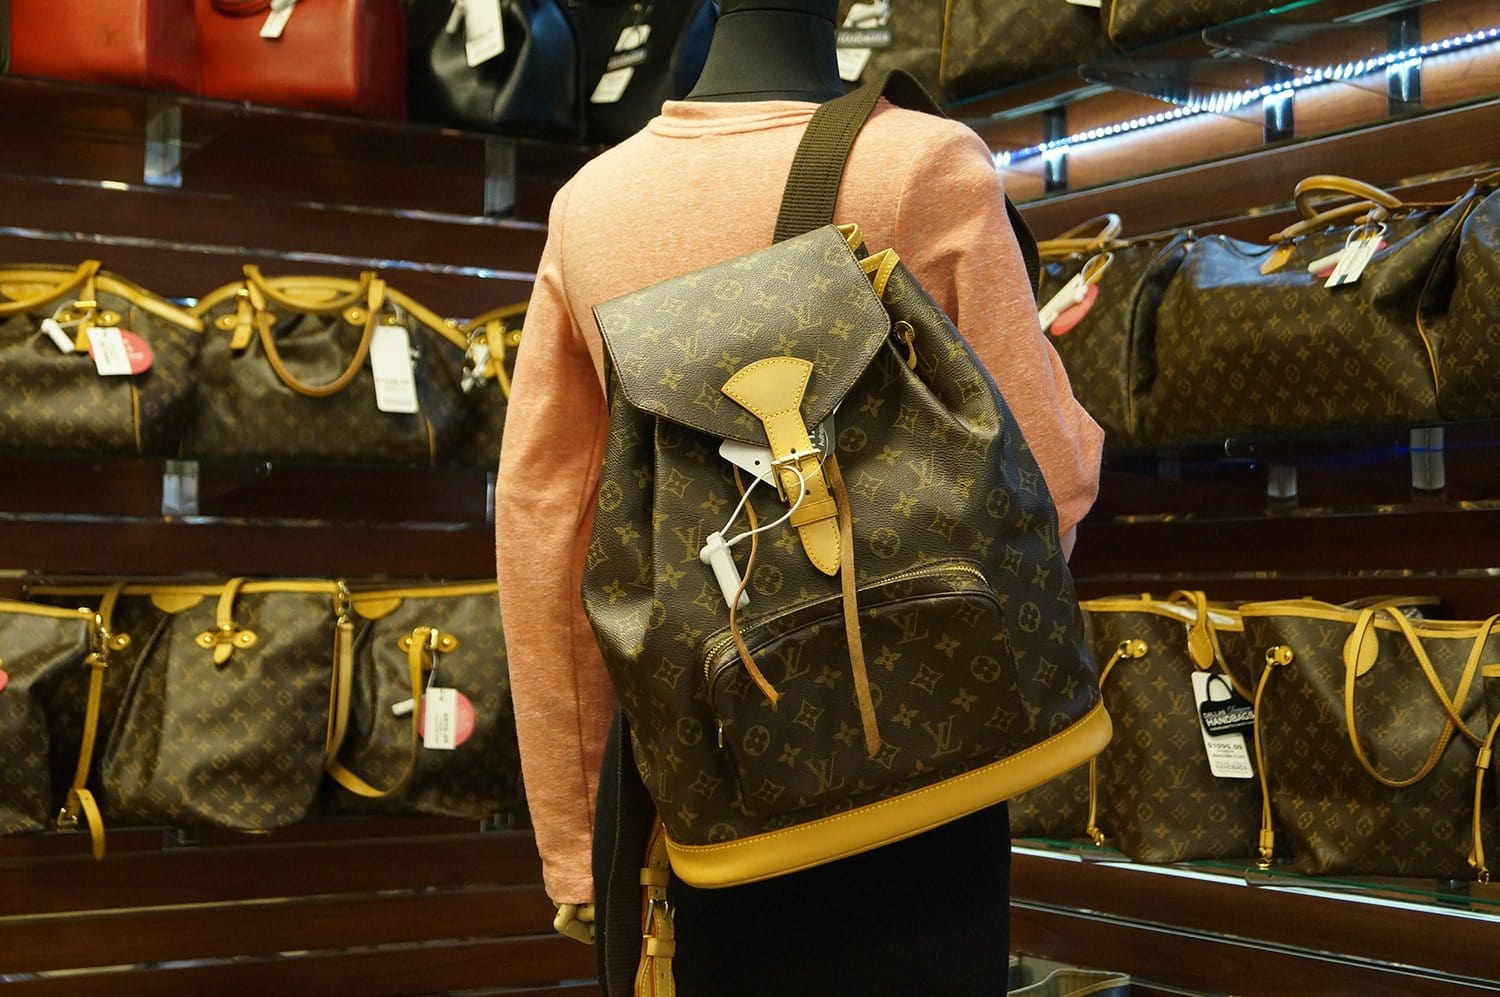 louis vuitton backpack size